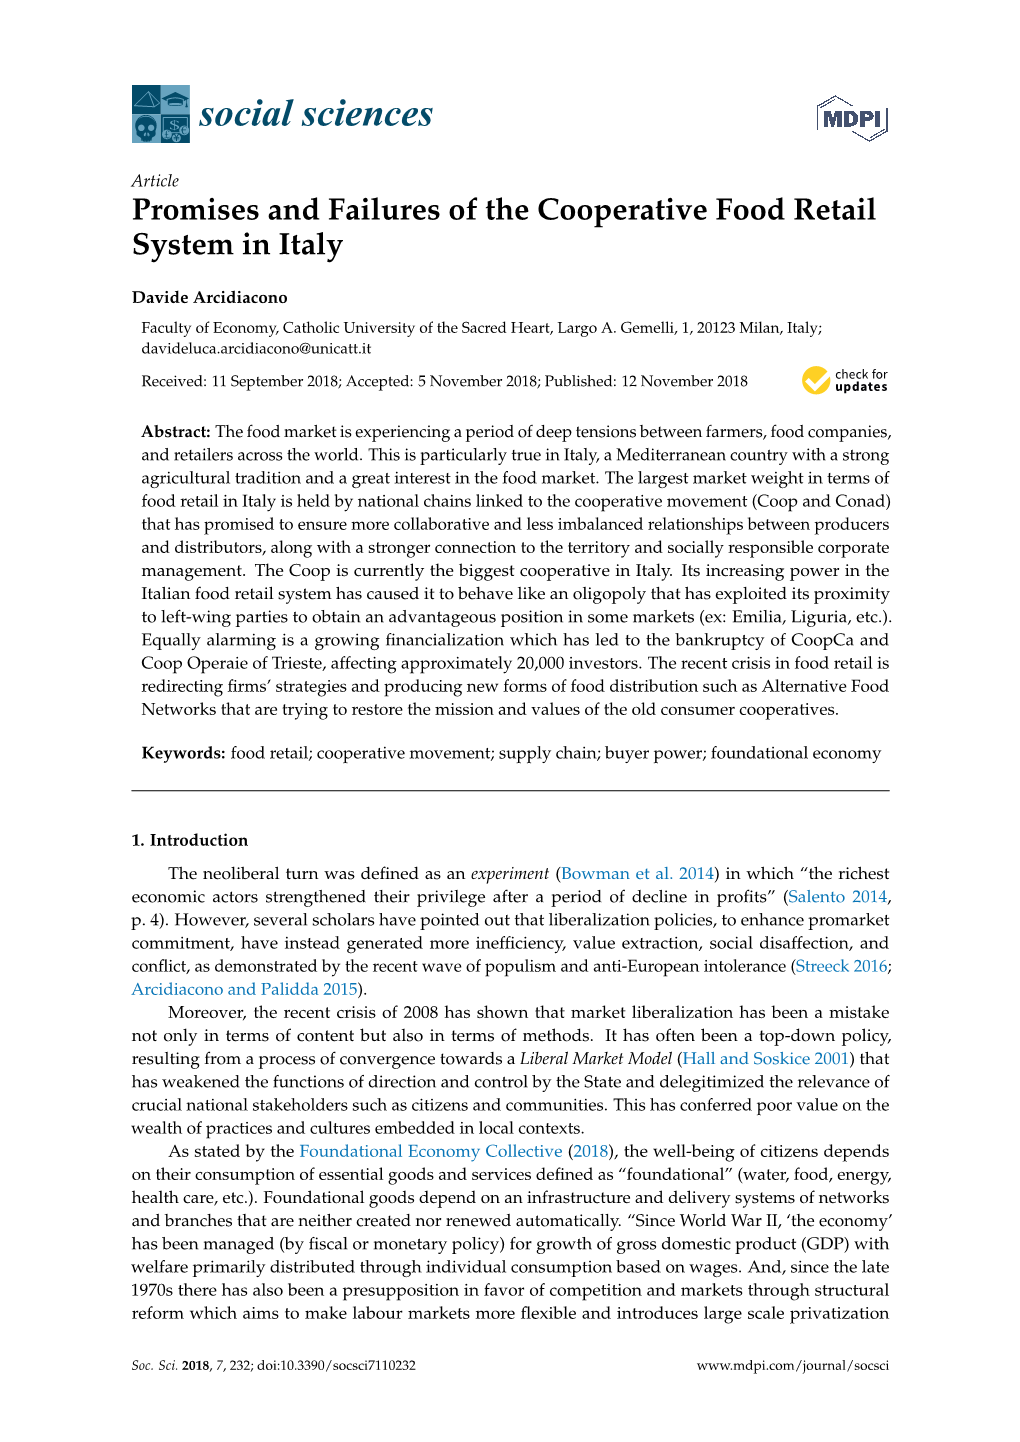 Promises and Failures of the Cooperative Food Retail System in Italy